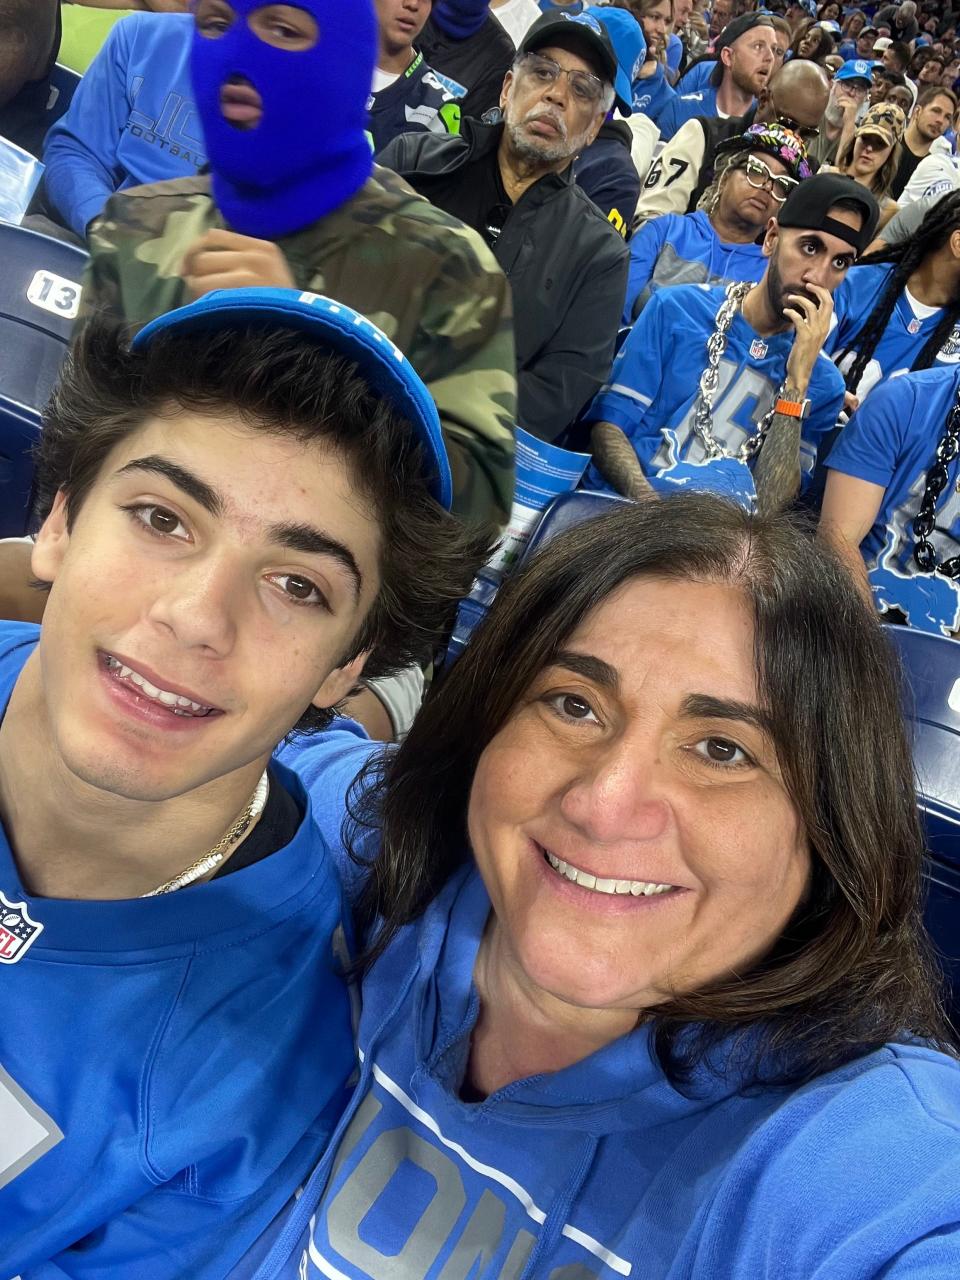 Joshua Paxton, left, and his mother, Vera, pose for a selfie during a Lions game at Ford Field.